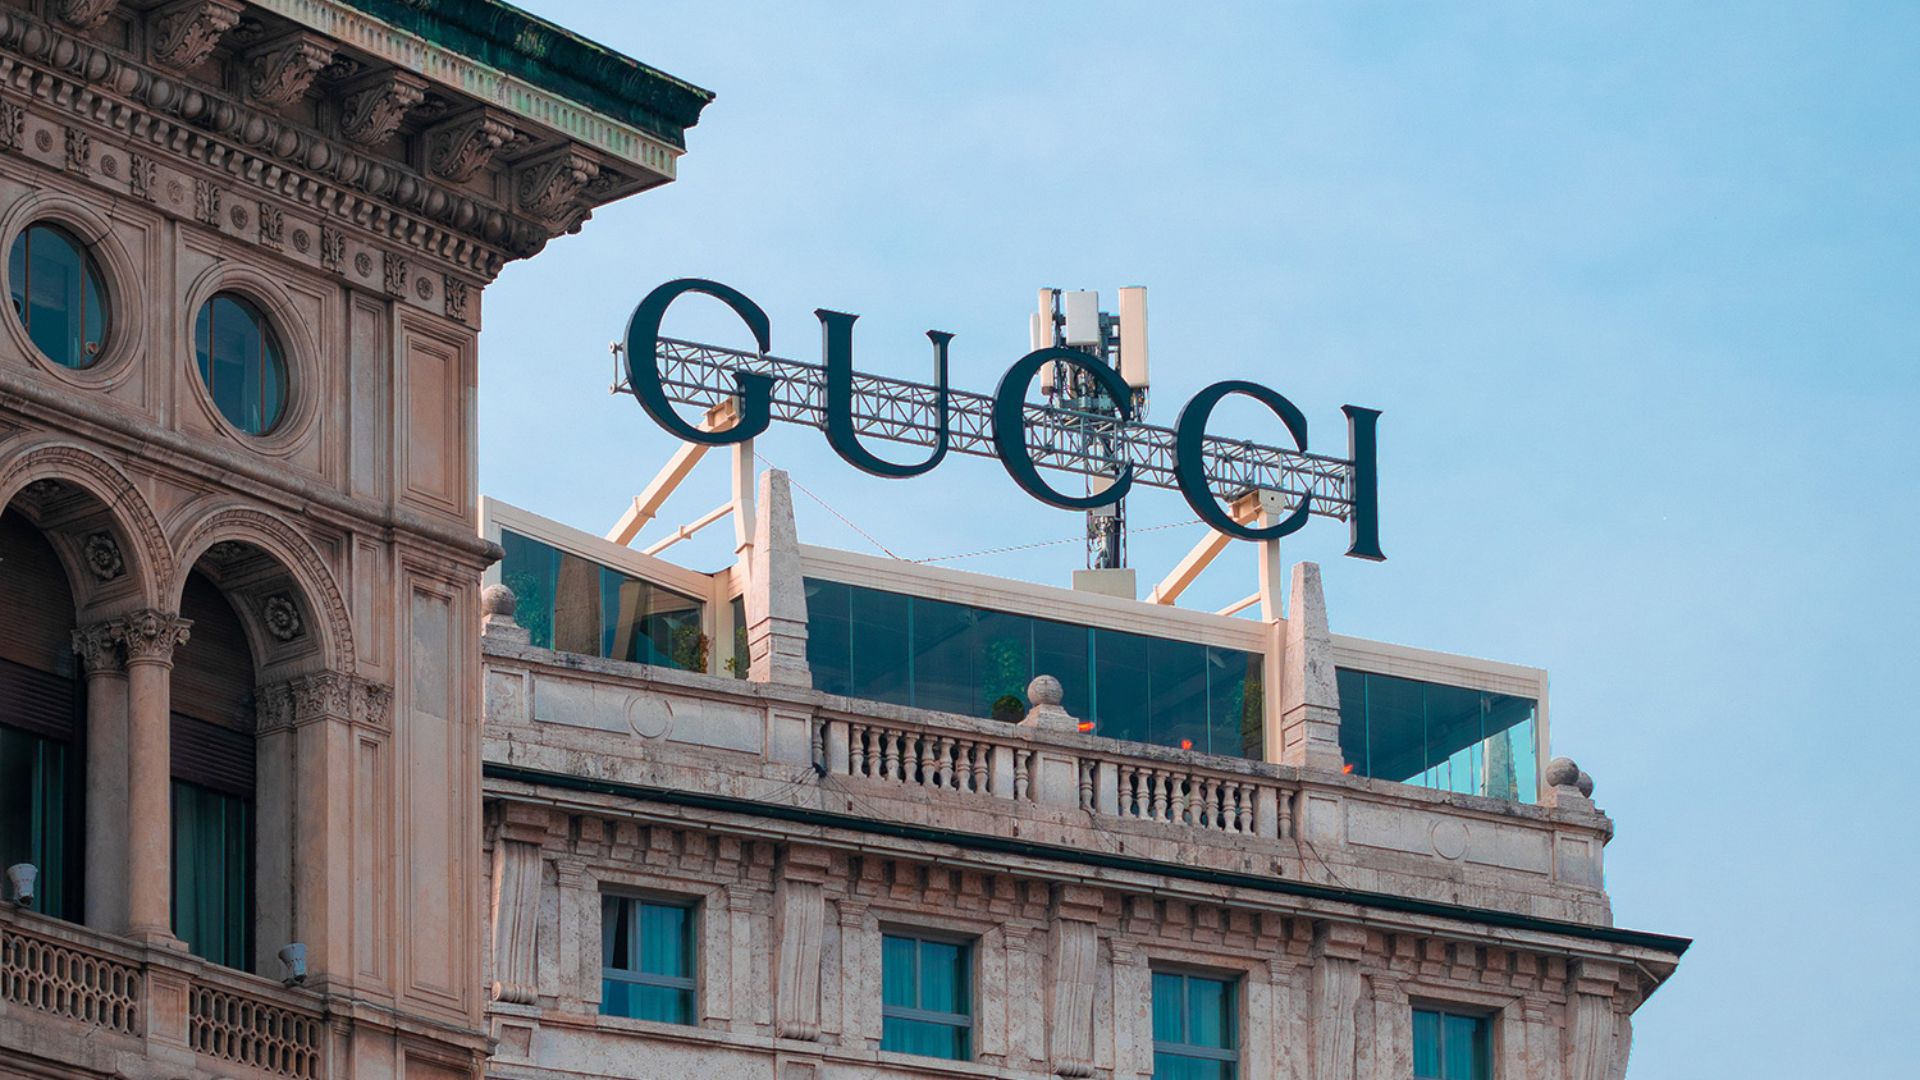 a building showing one of the Italian fashion brands